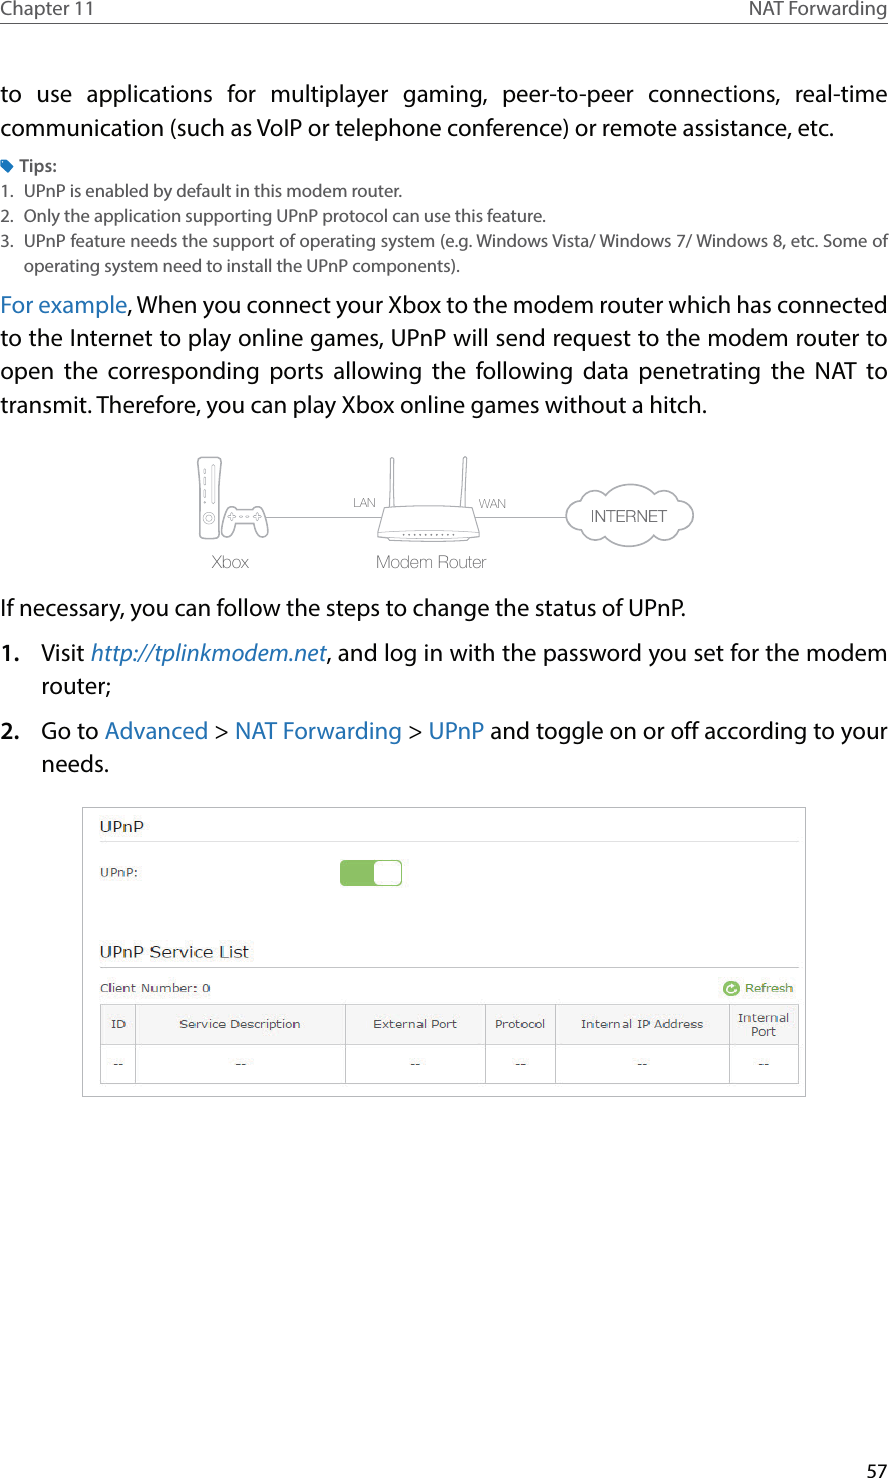 57Chapter 11 NAT Forwardingto use applications for multiplayer gaming, peer-to-peer connections, real-time communication (such as VoIP or telephone conference) or remote assistance, etc.Tips:1.  UPnP is enabled by default in this modem router.2.  Only the application supporting UPnP protocol can use this feature.3.  UPnP feature needs the support of operating system (e.g. Windows Vista/ Windows 7/ Windows 8, etc. Some of operating system need to install the UPnP components).For example, When you connect your Xbox to the modem router which has connected to the Internet to play online games, UPnP will send request to the modem router to open the corresponding ports allowing the following data penetrating the NAT to transmit. Therefore, you can play Xbox online games without a hitch.Modem RouterXboxLAN WANIf necessary, you can follow the steps to change the status of UPnP.1.  Visit http://tplinkmodem.net, and log in with the password you set for the modem router;2.  Go to Advanced &gt; NAT Forwarding &gt; UPnP and toggle on or off according to your needs.